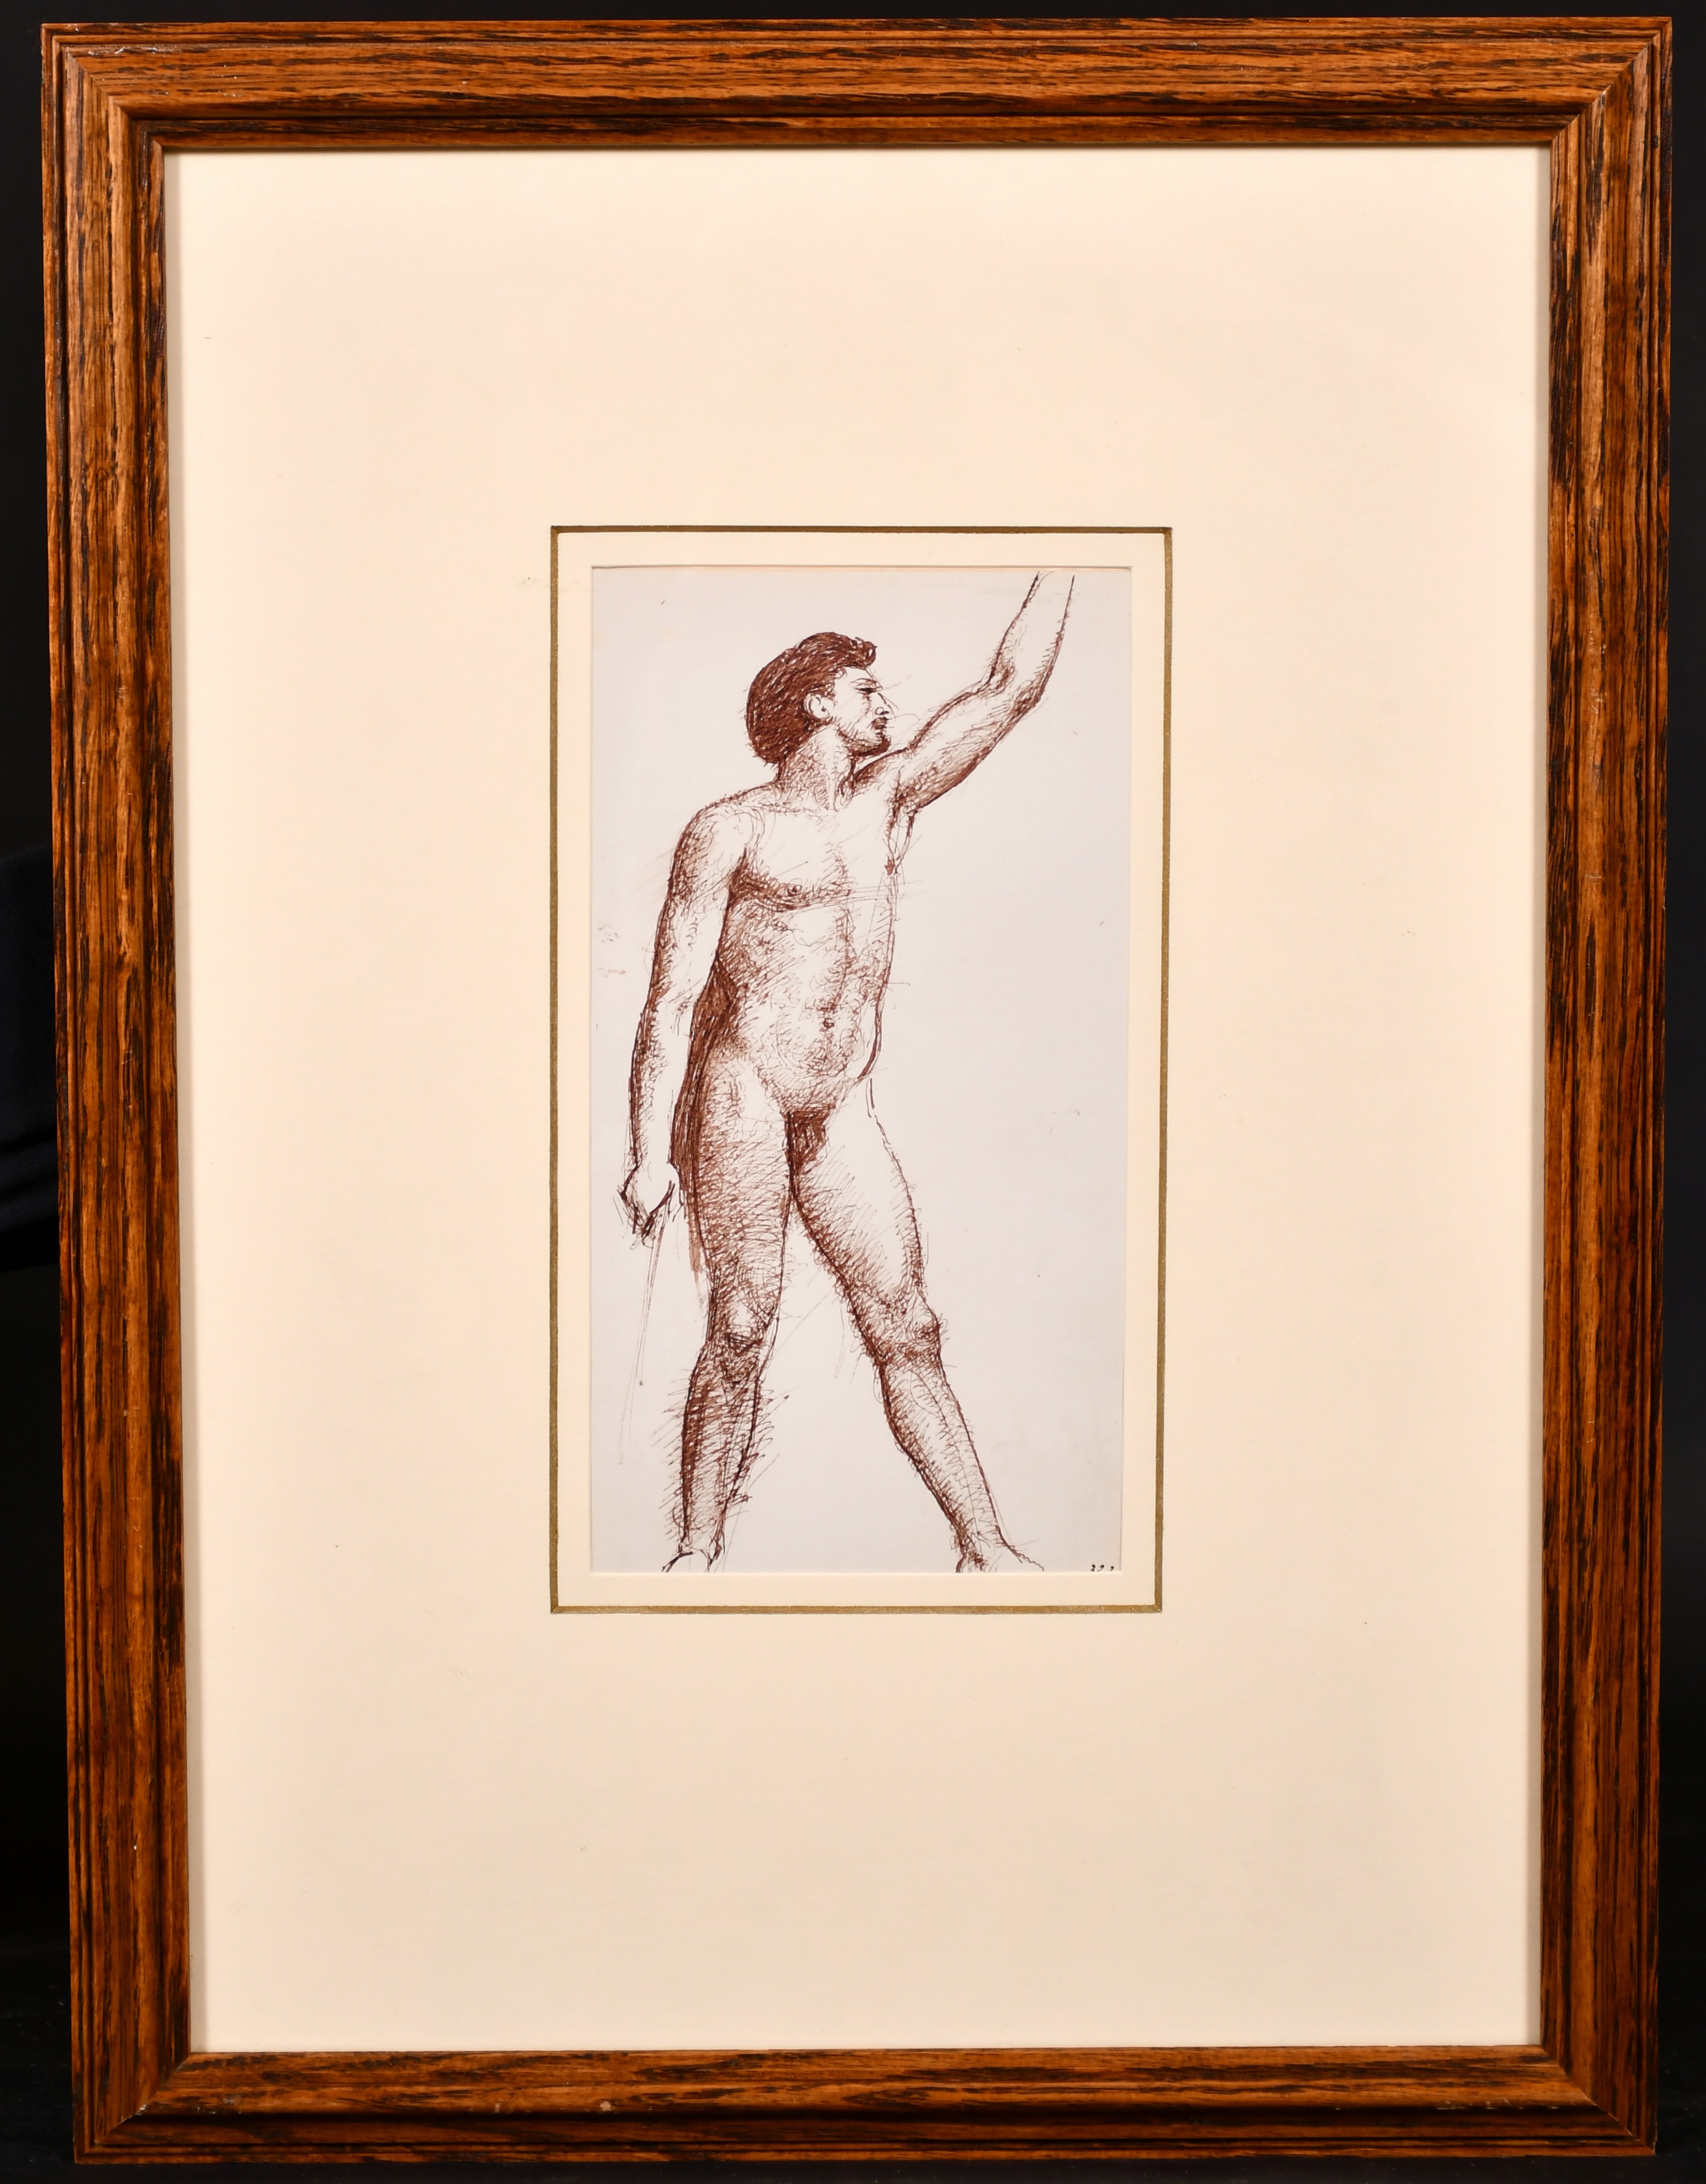 William Edward Frost (1810-1877) British. Study of a Male Nude, Watercolour Pen and Ink, Inscribed - Image 2 of 5